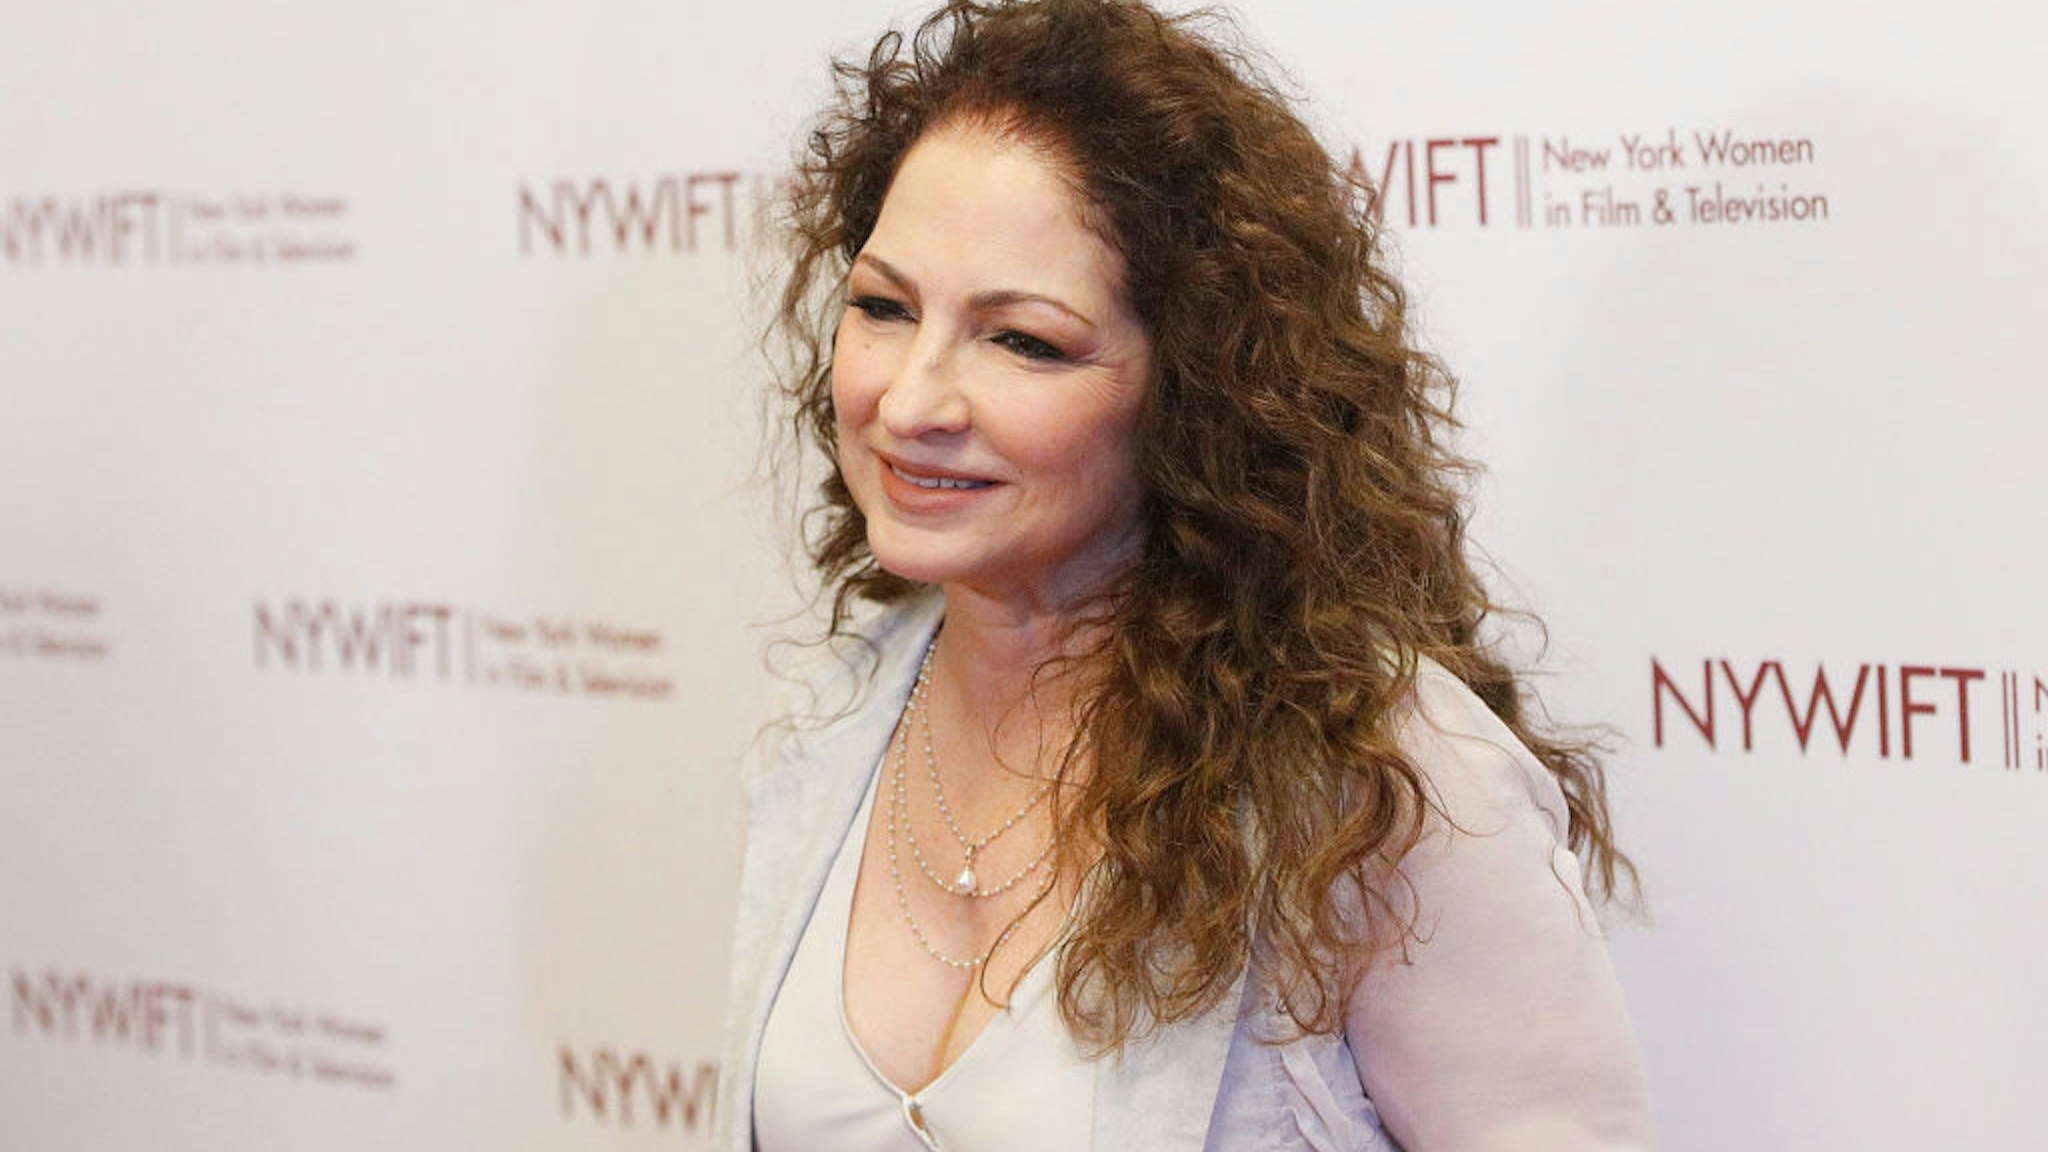 NEW YORK, NY - DECEMBER 10: Singer Gloria Estefan attends the 2019 NYWIFT Muse Awards at the New York Hilton Midtown on December 10, 2019 in New York City. (Photo by Lars Niki/Getty Images for New York Women in Film & Television)